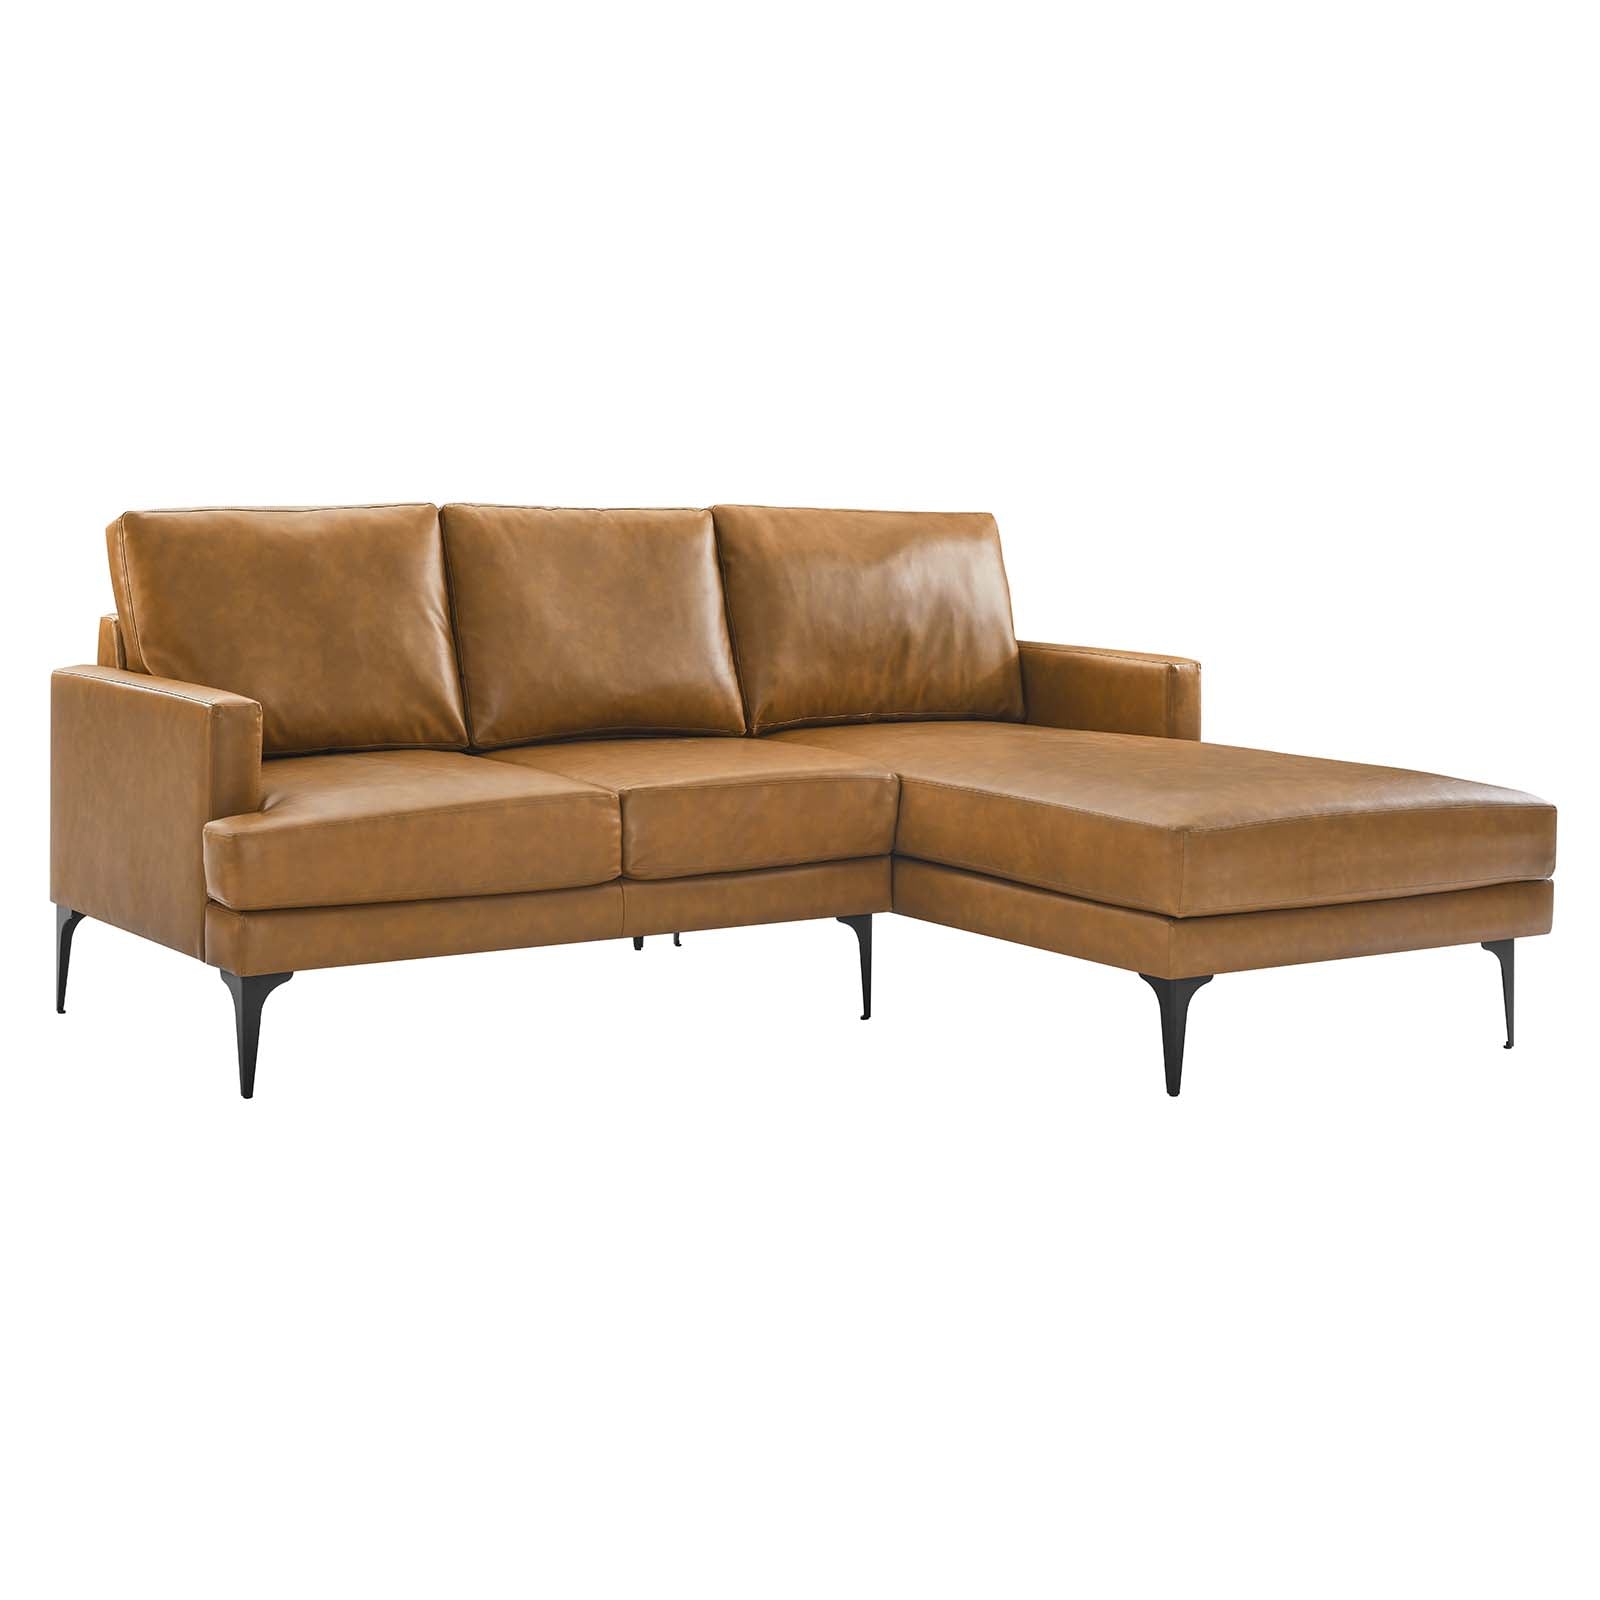 Evermore Right-Facing Vegan Leather Sectional Sofa